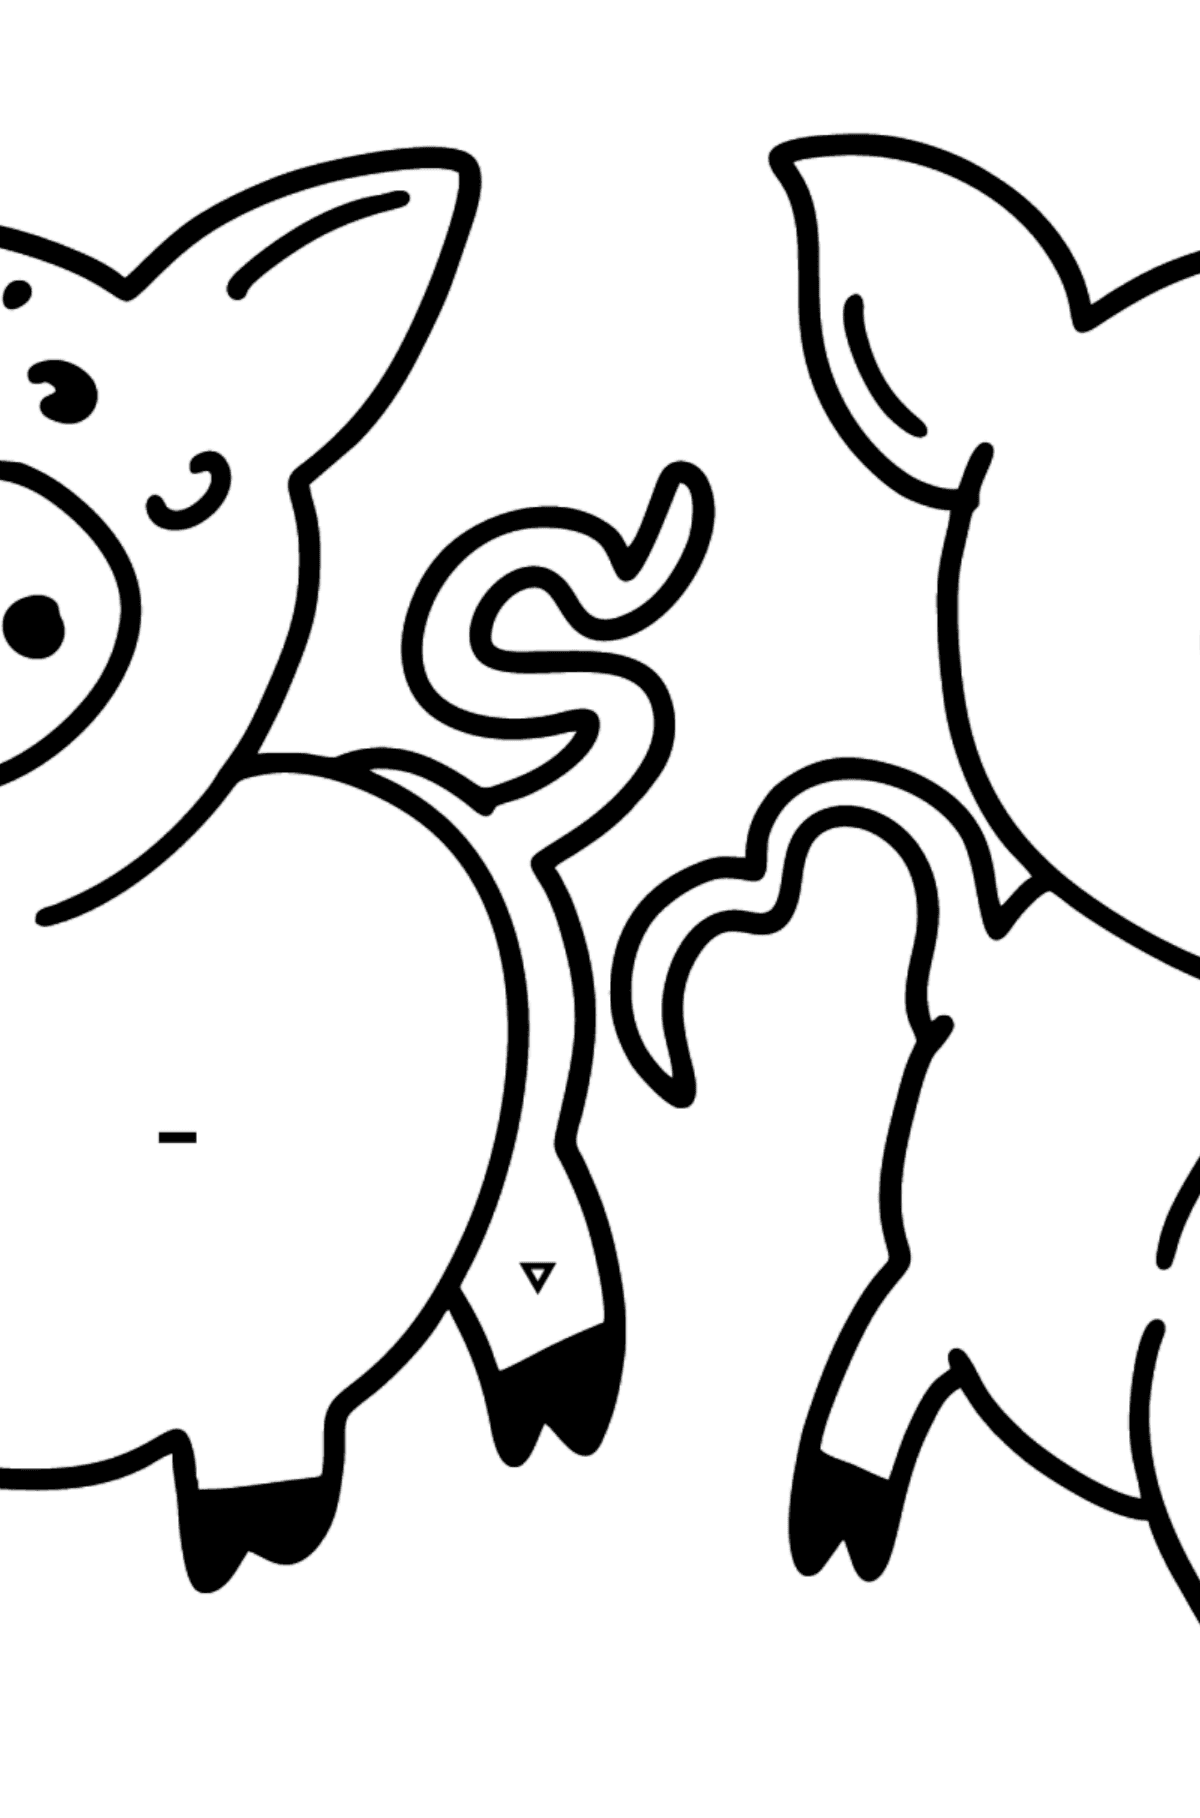 Piglets coloring page - Coloring by Symbols for Kids